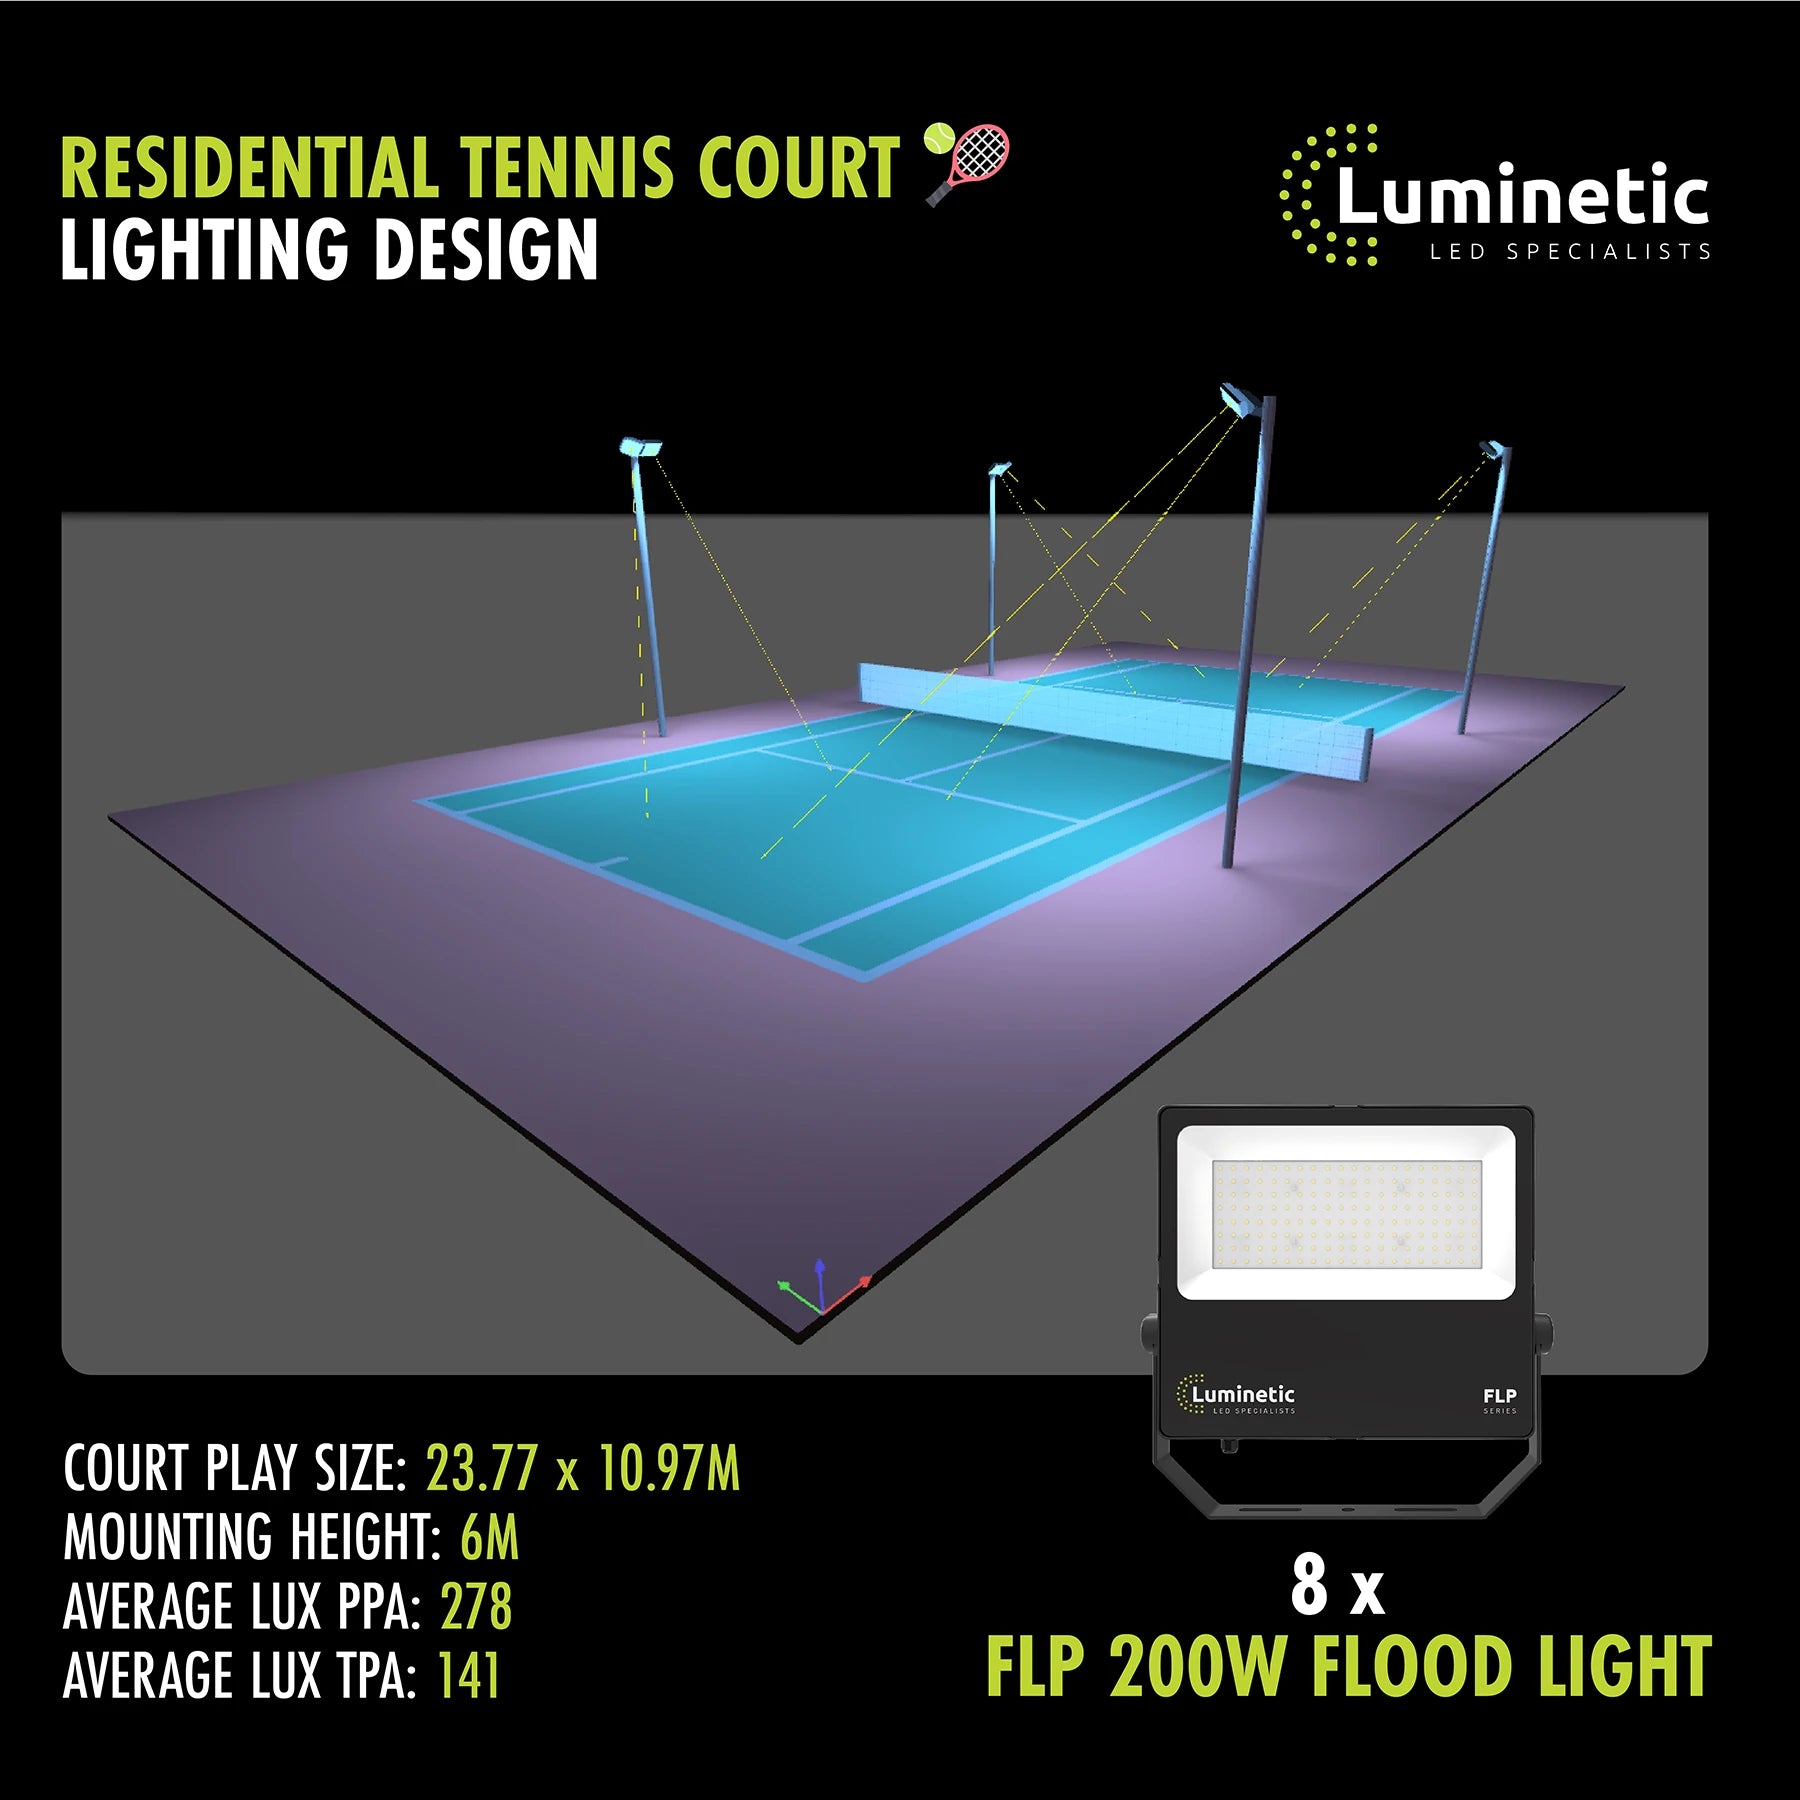 Residential tennis court lighting design to AS2560.2.1